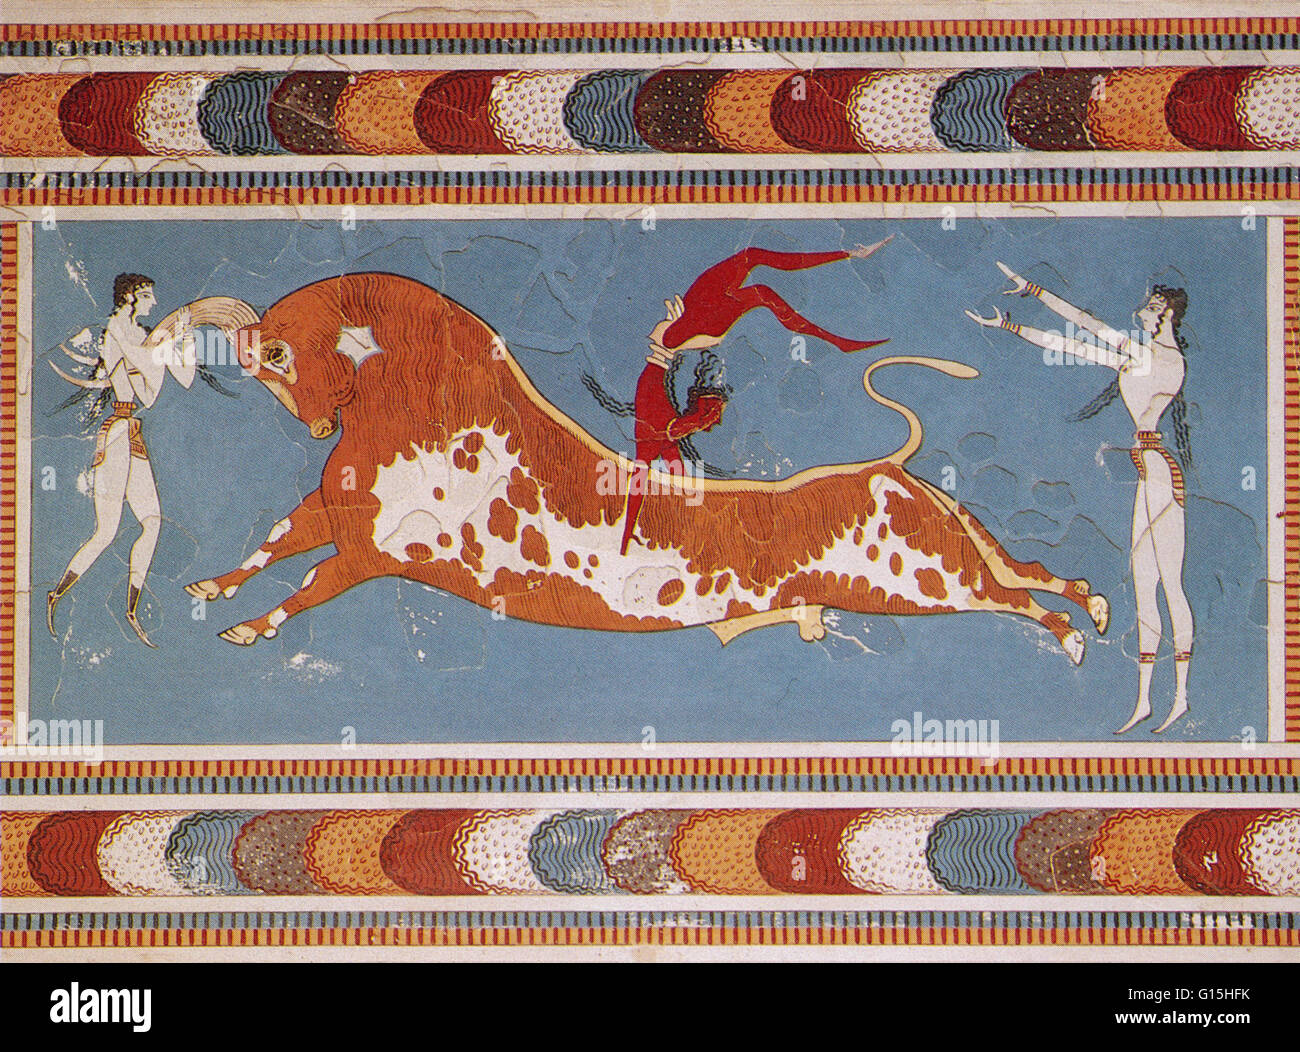 Reconstruction of the bull-leaping fresco from the Knossos Minoan Palace. It is interpreted to be a depiction of a ritual performed in connection with bull worship. An alternative interpretation is that the leaping bull represents a rite of passage for yo Stock Photo